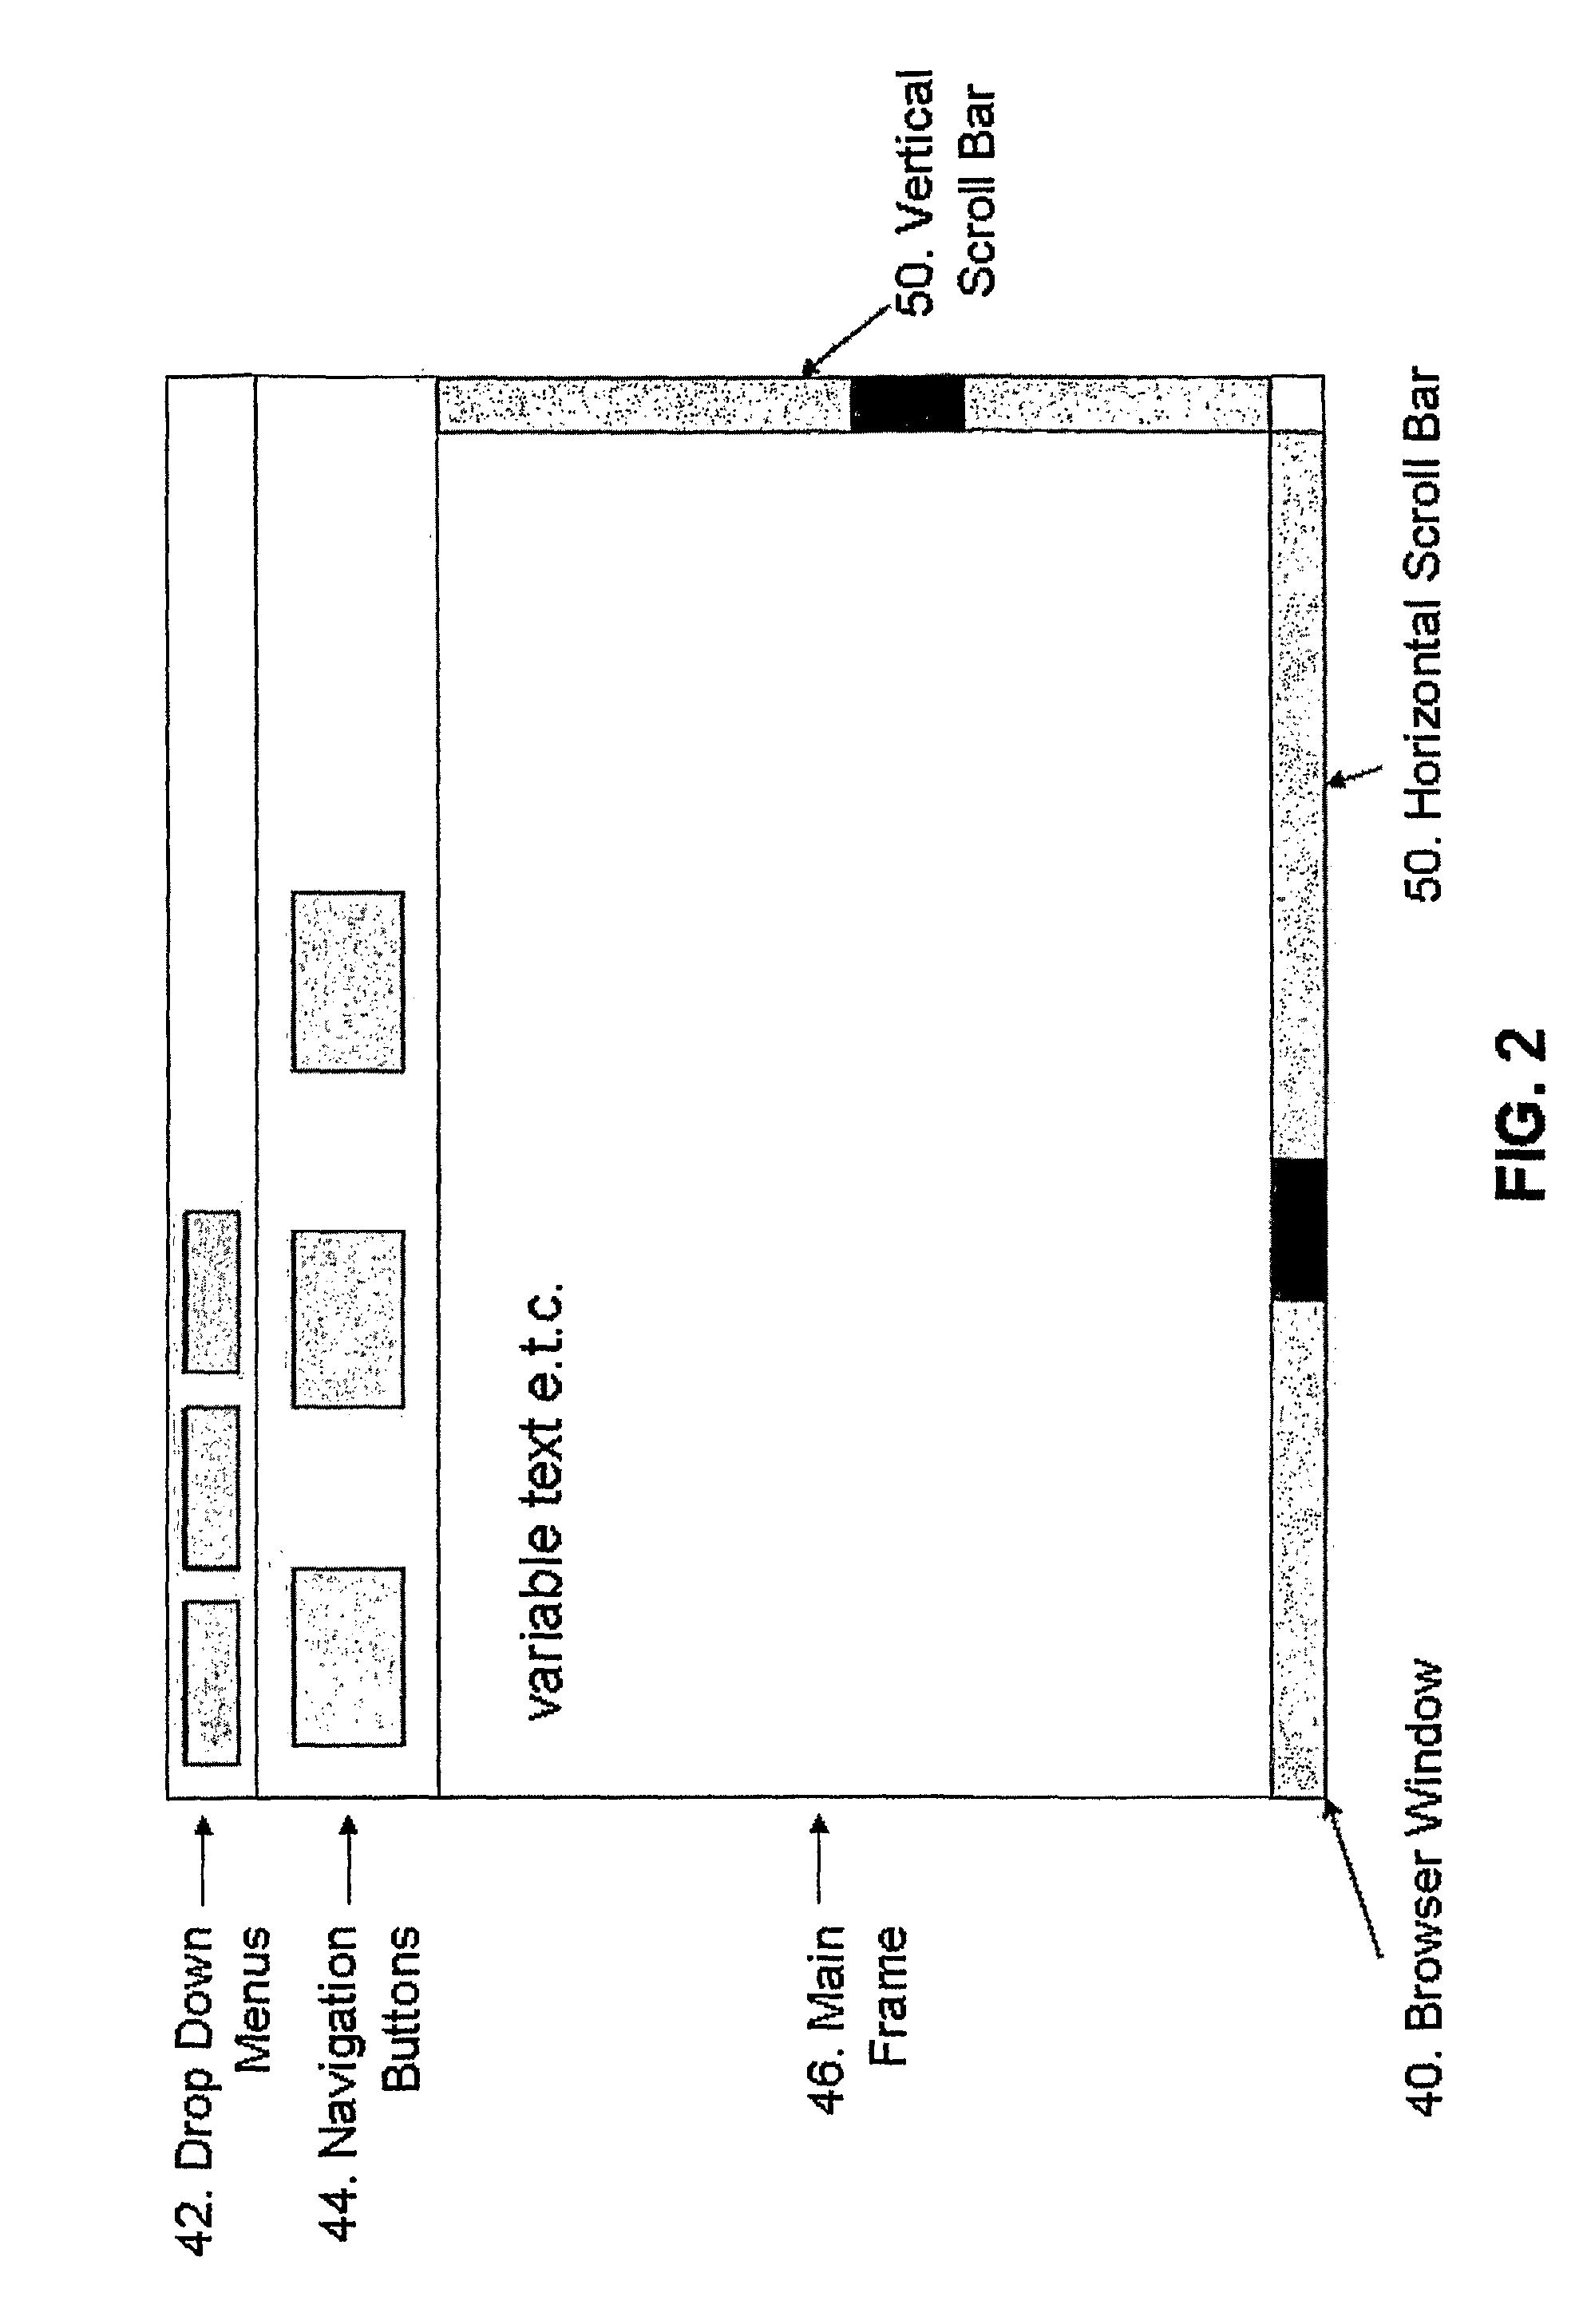 Systems, methods, and computer readable media for providing applications style functionality to a user